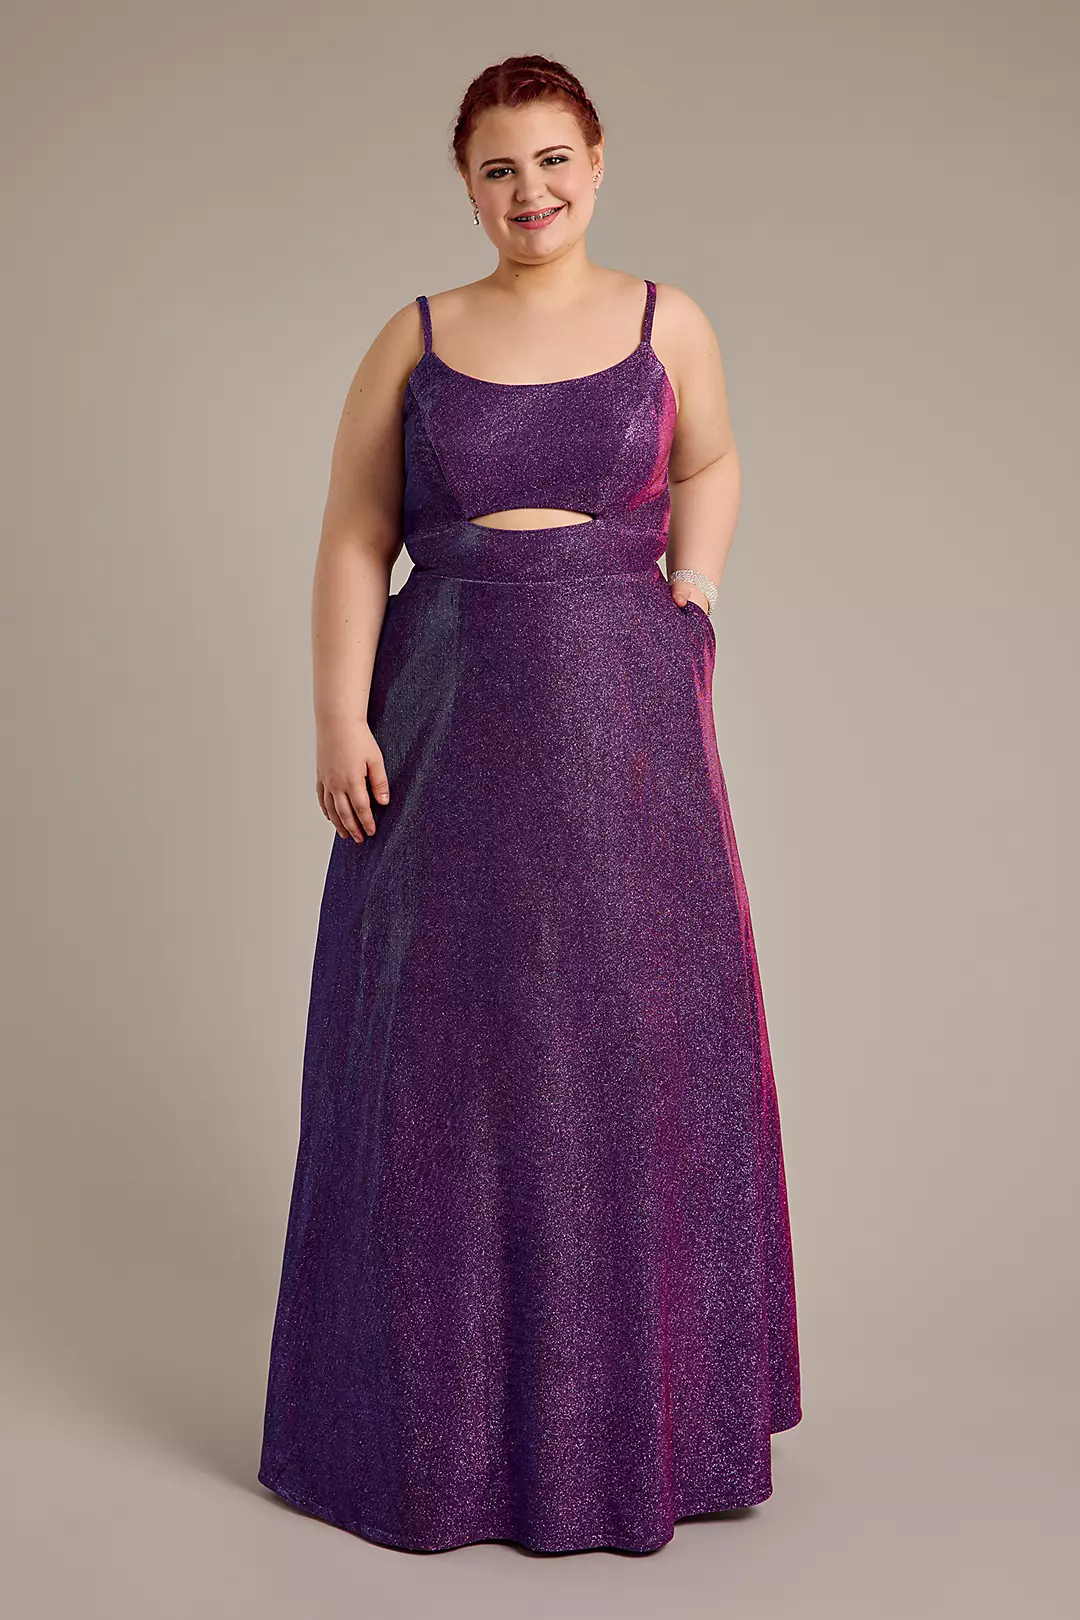 Glitter Ball Gown with Bodice Cutout Image